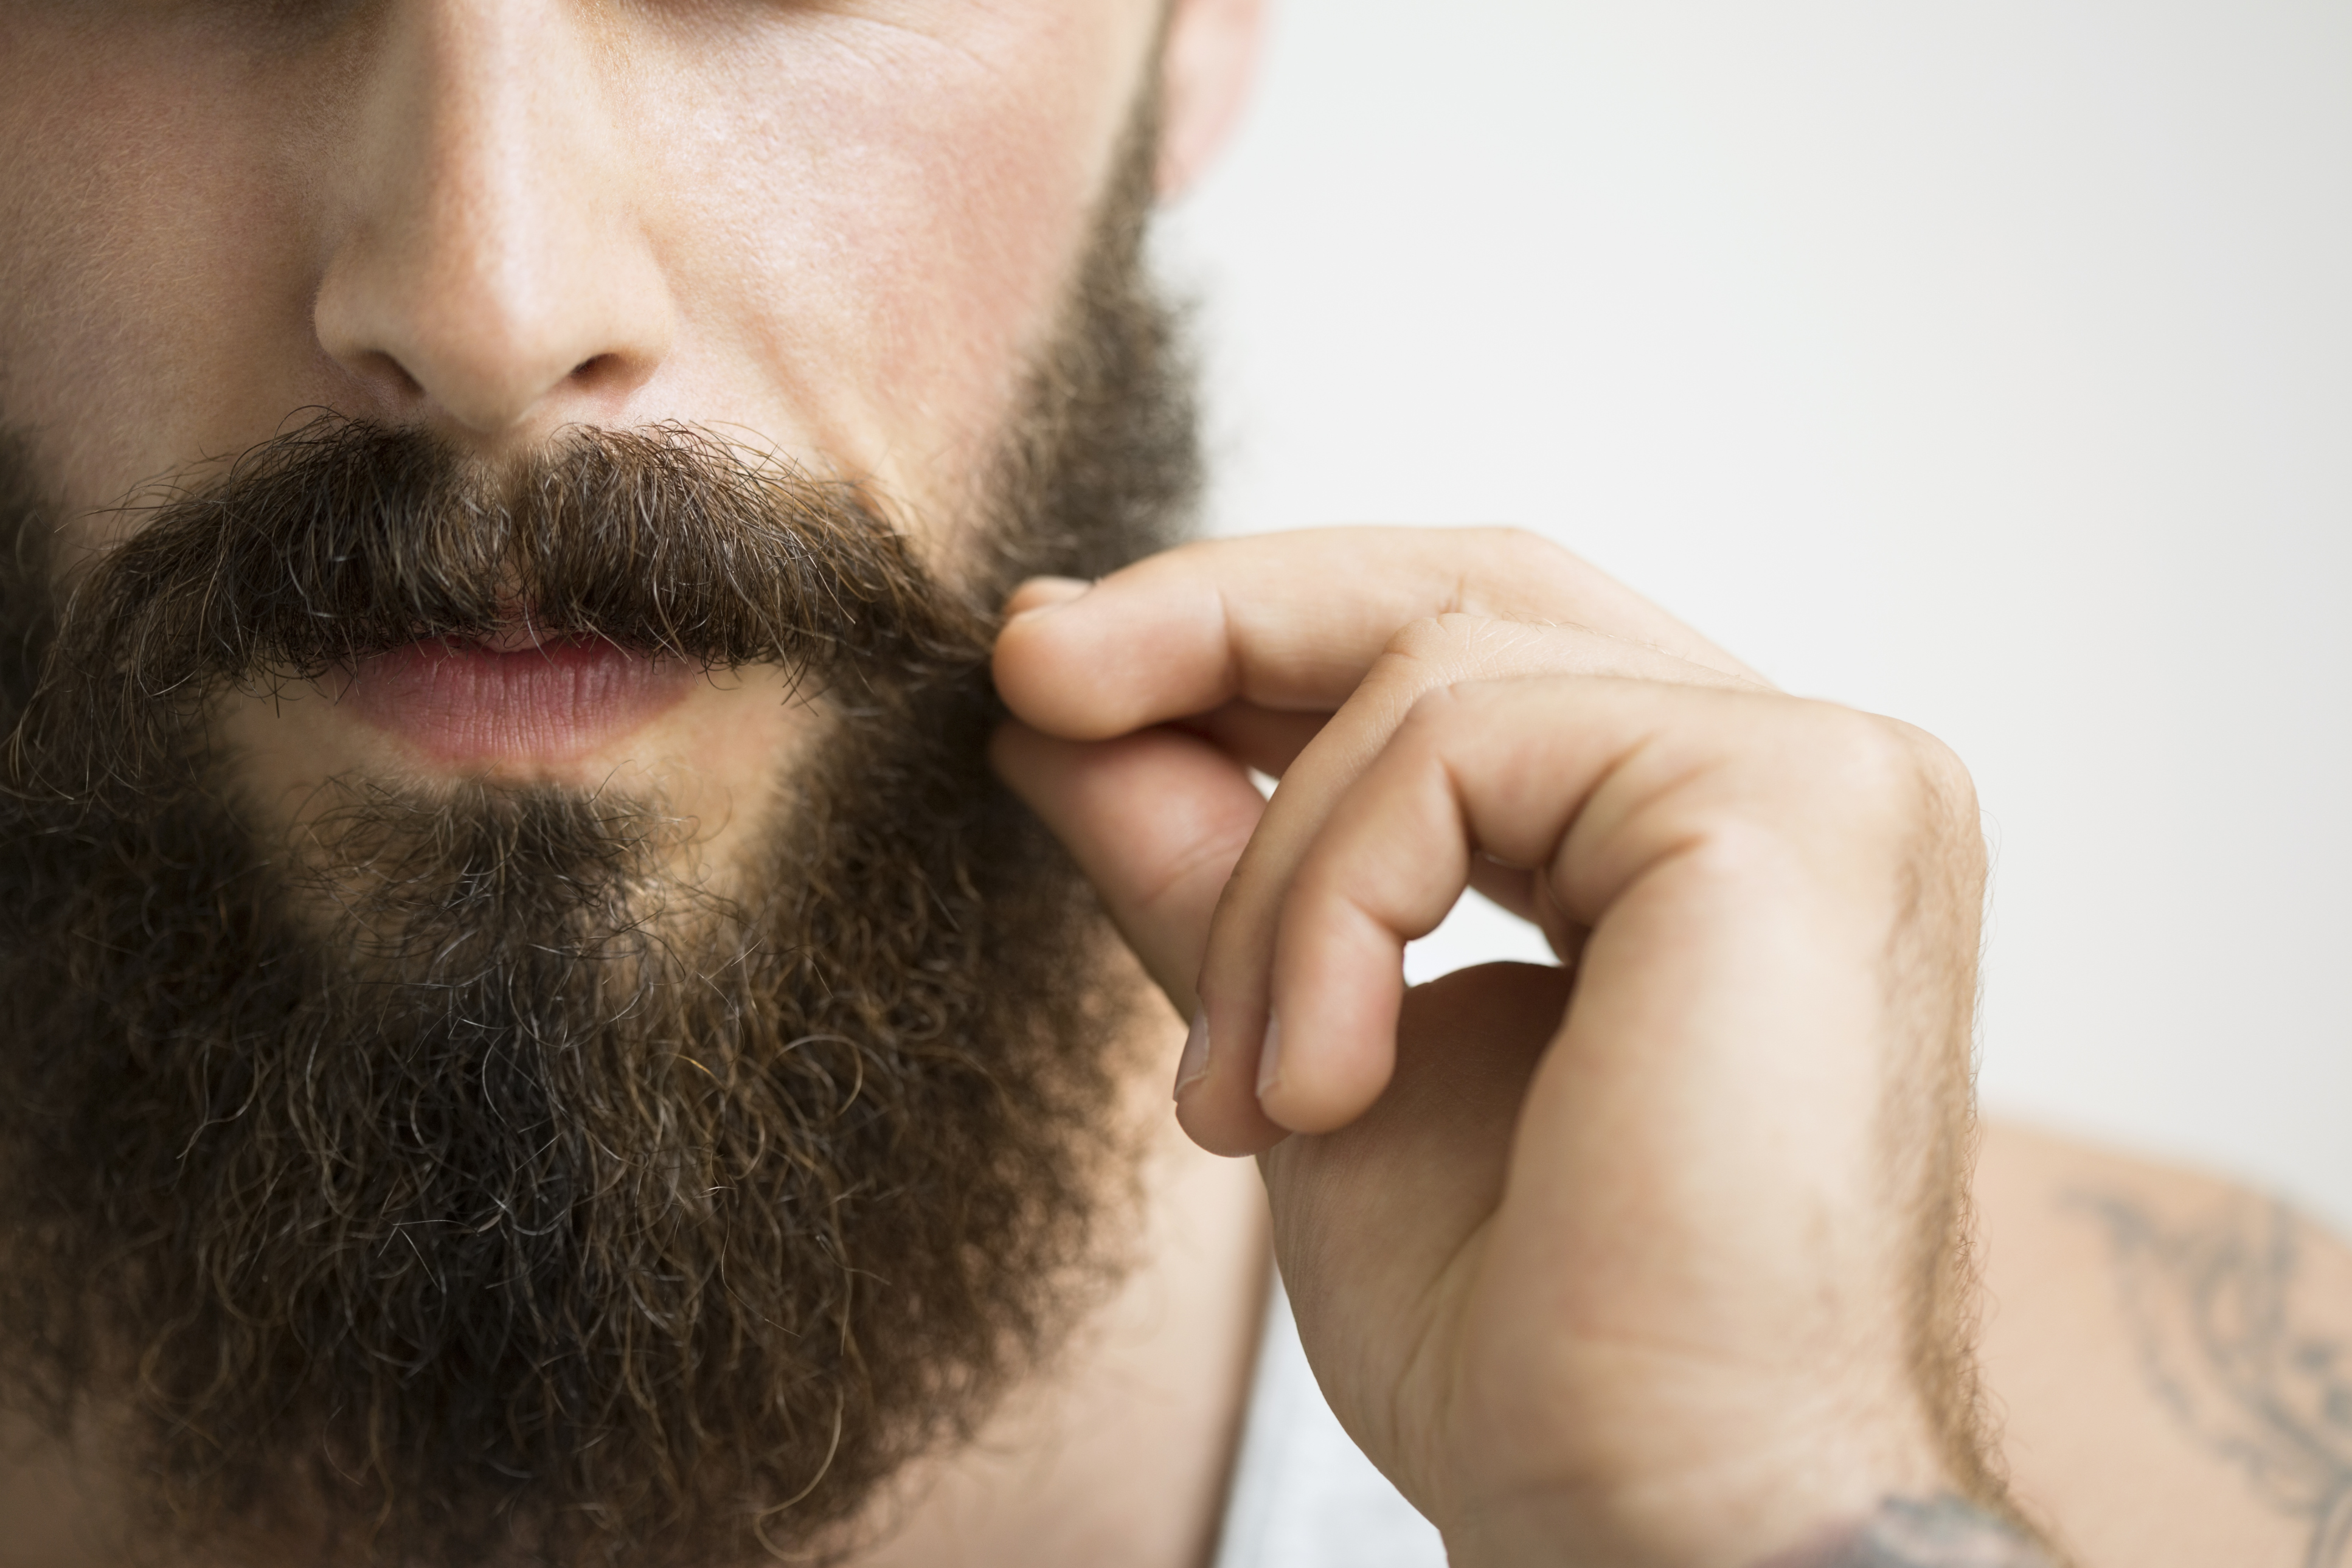 Beards full of poo, invented illness, and other things that were fake
online this week